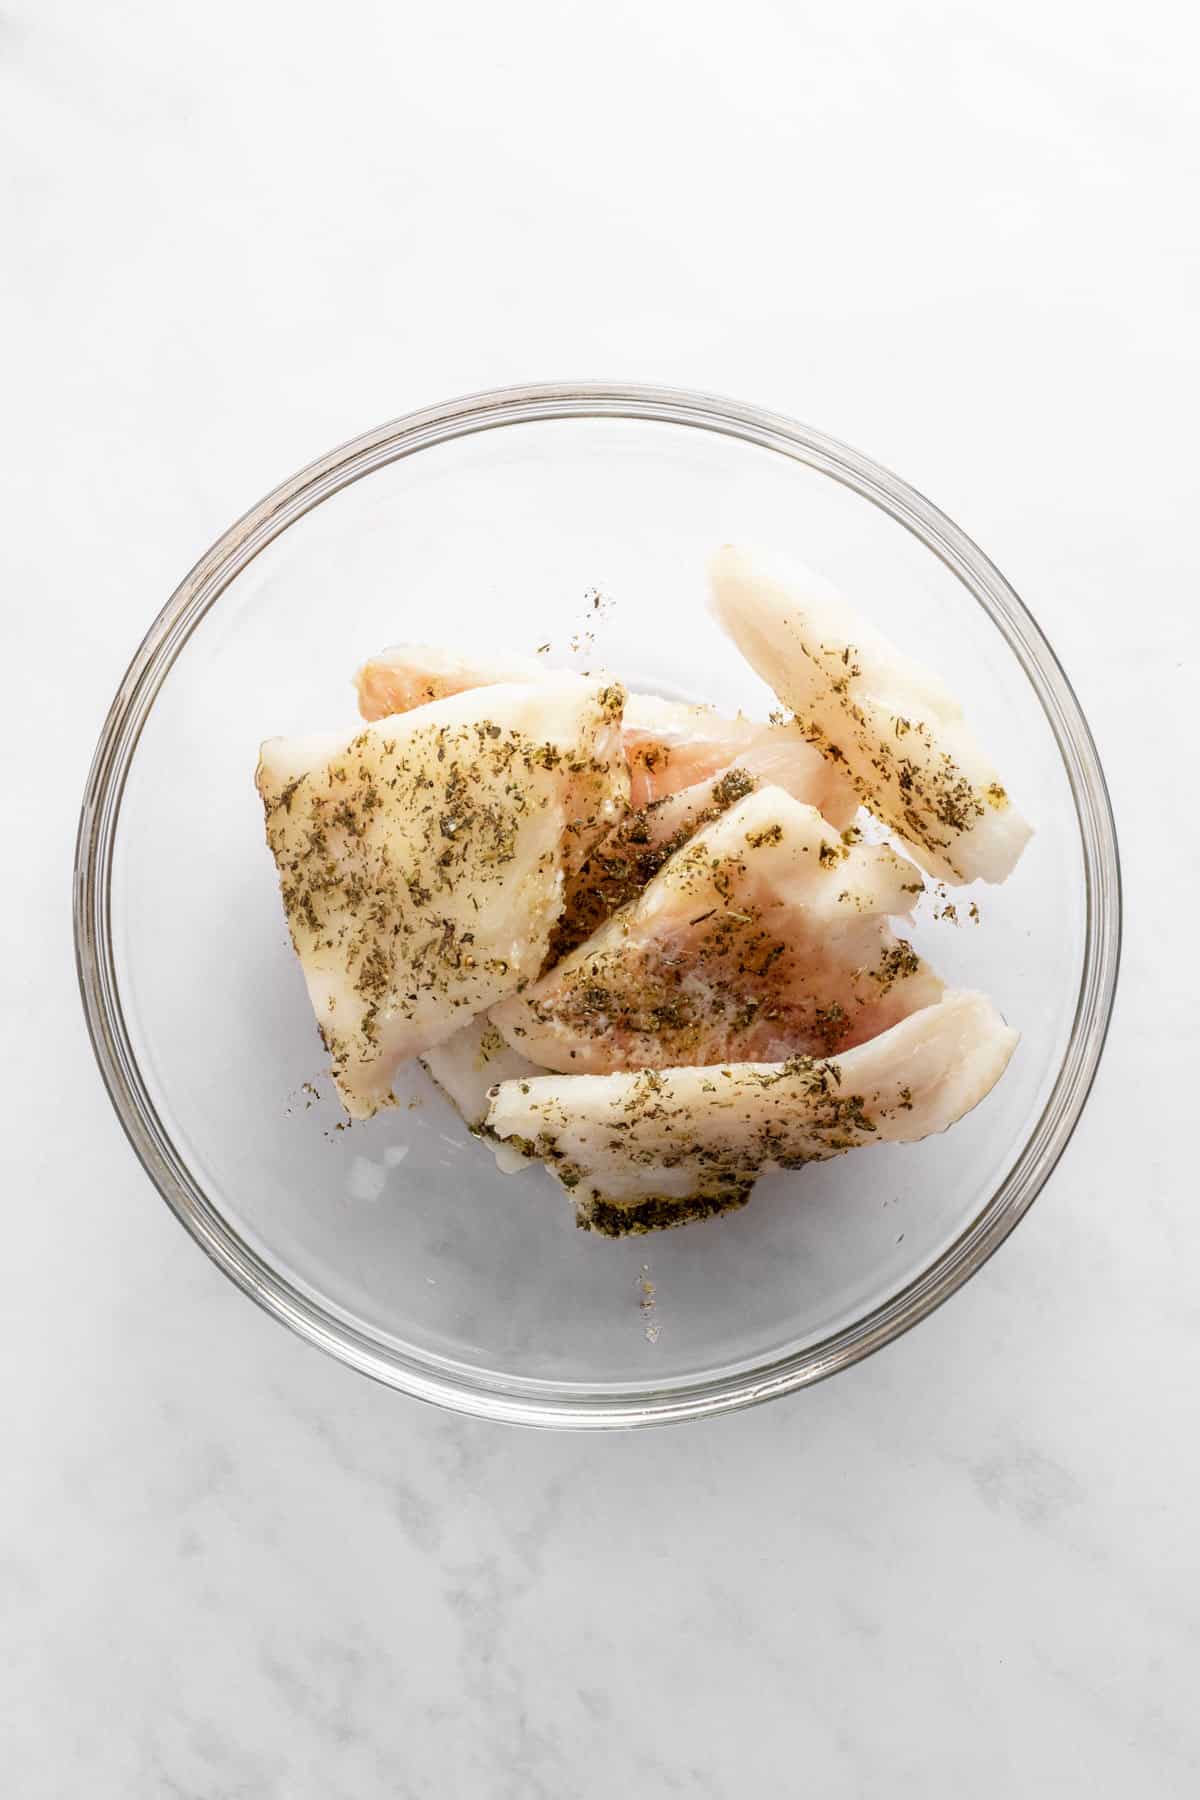 cod fillets mixed with olive oil and dried herbs